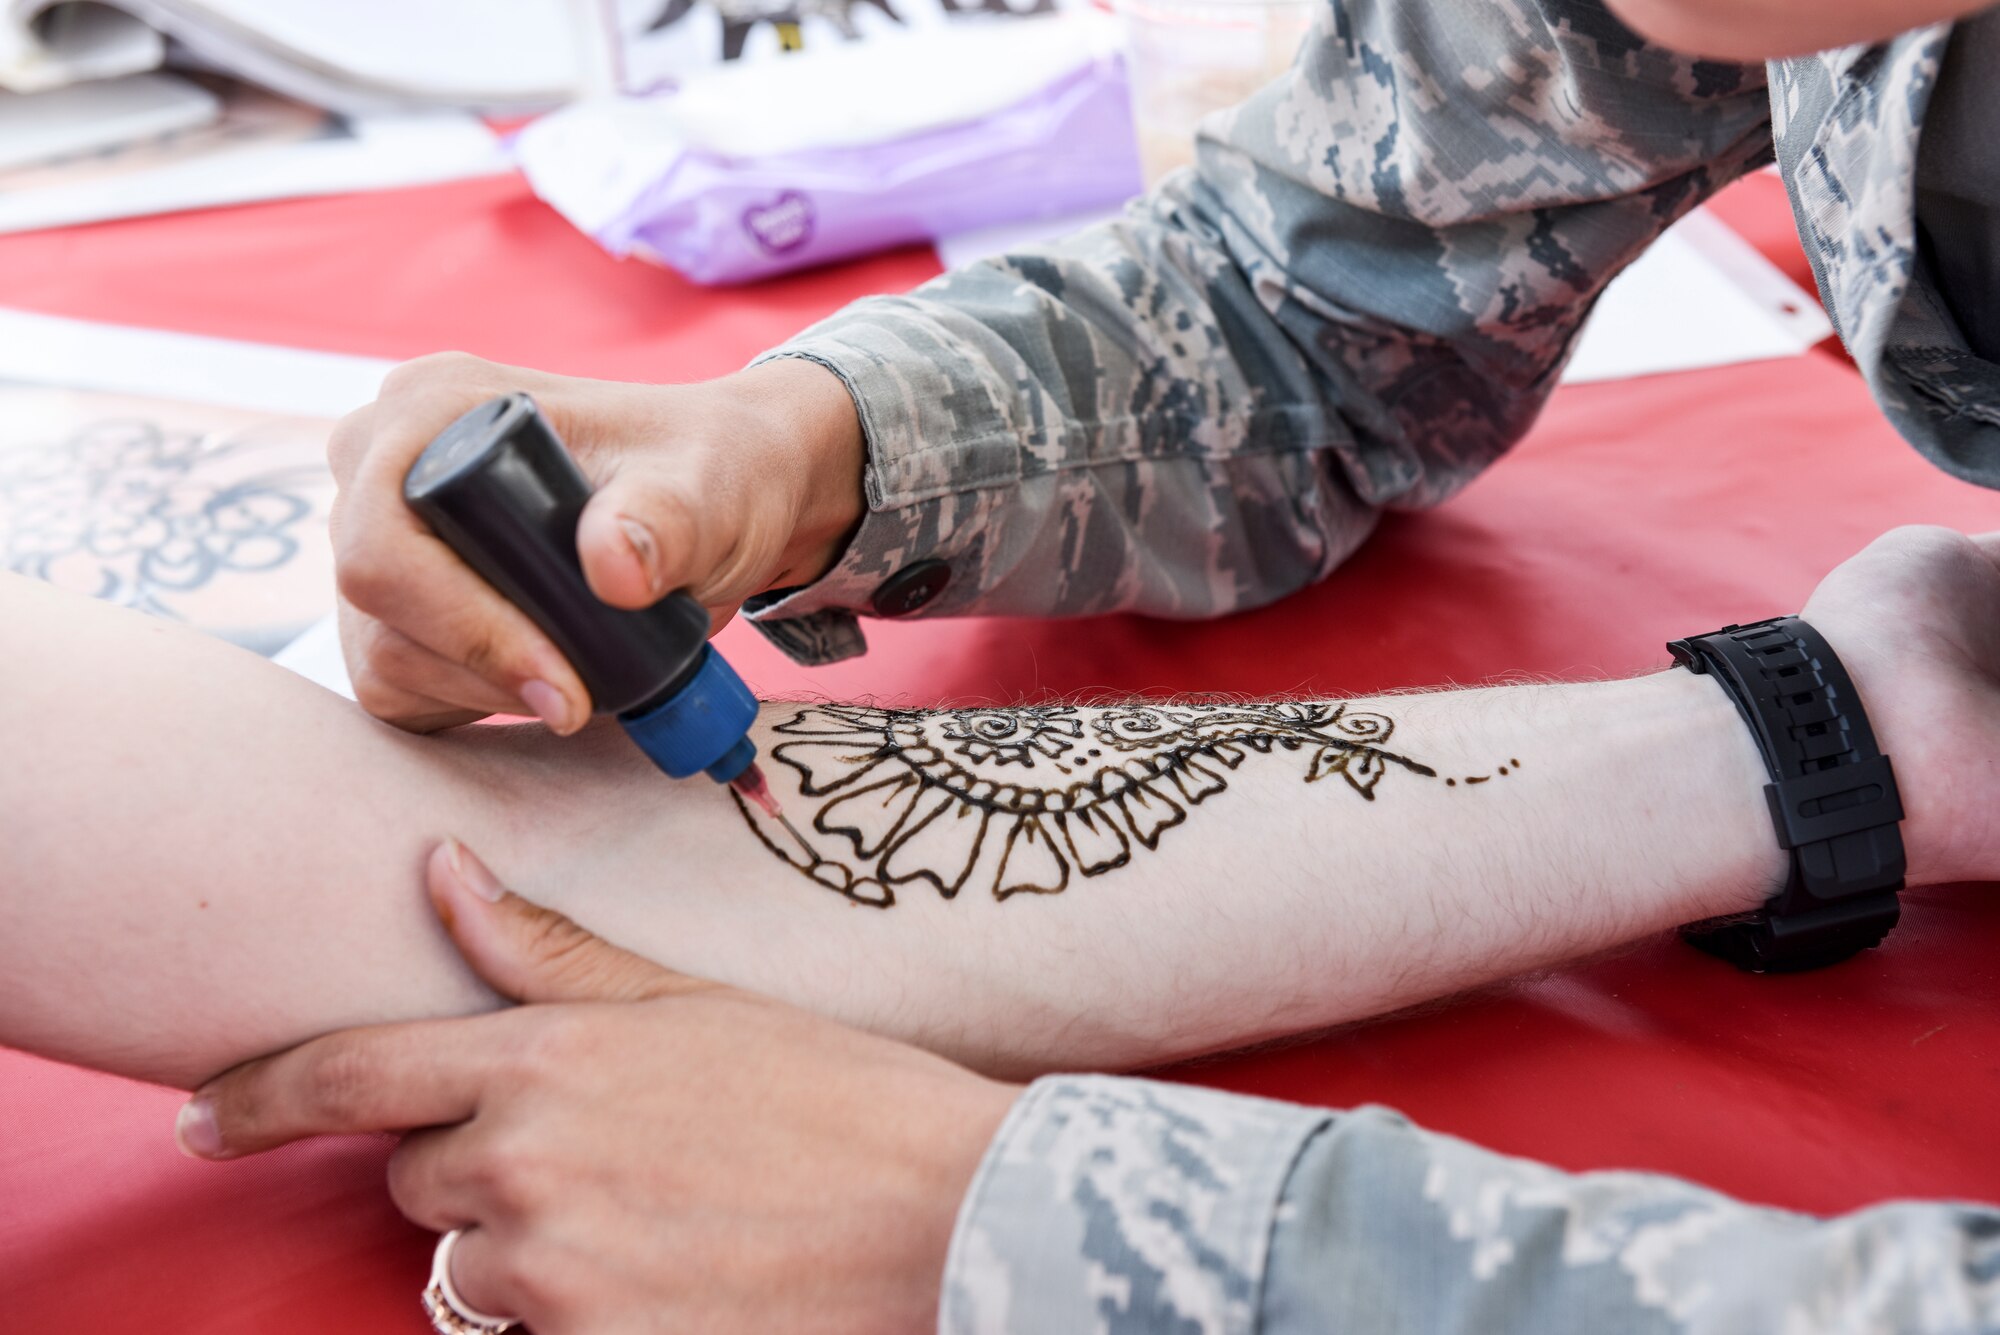 Students draw henna tattoos on visitors during the Defense Language Institute Foreign Language Center's Language Day at the Presideo of Monterey, California, May 11, 2018. In addition to performances on stage, students and faculty set up cultural tents showcasing cultural items, games and activities.